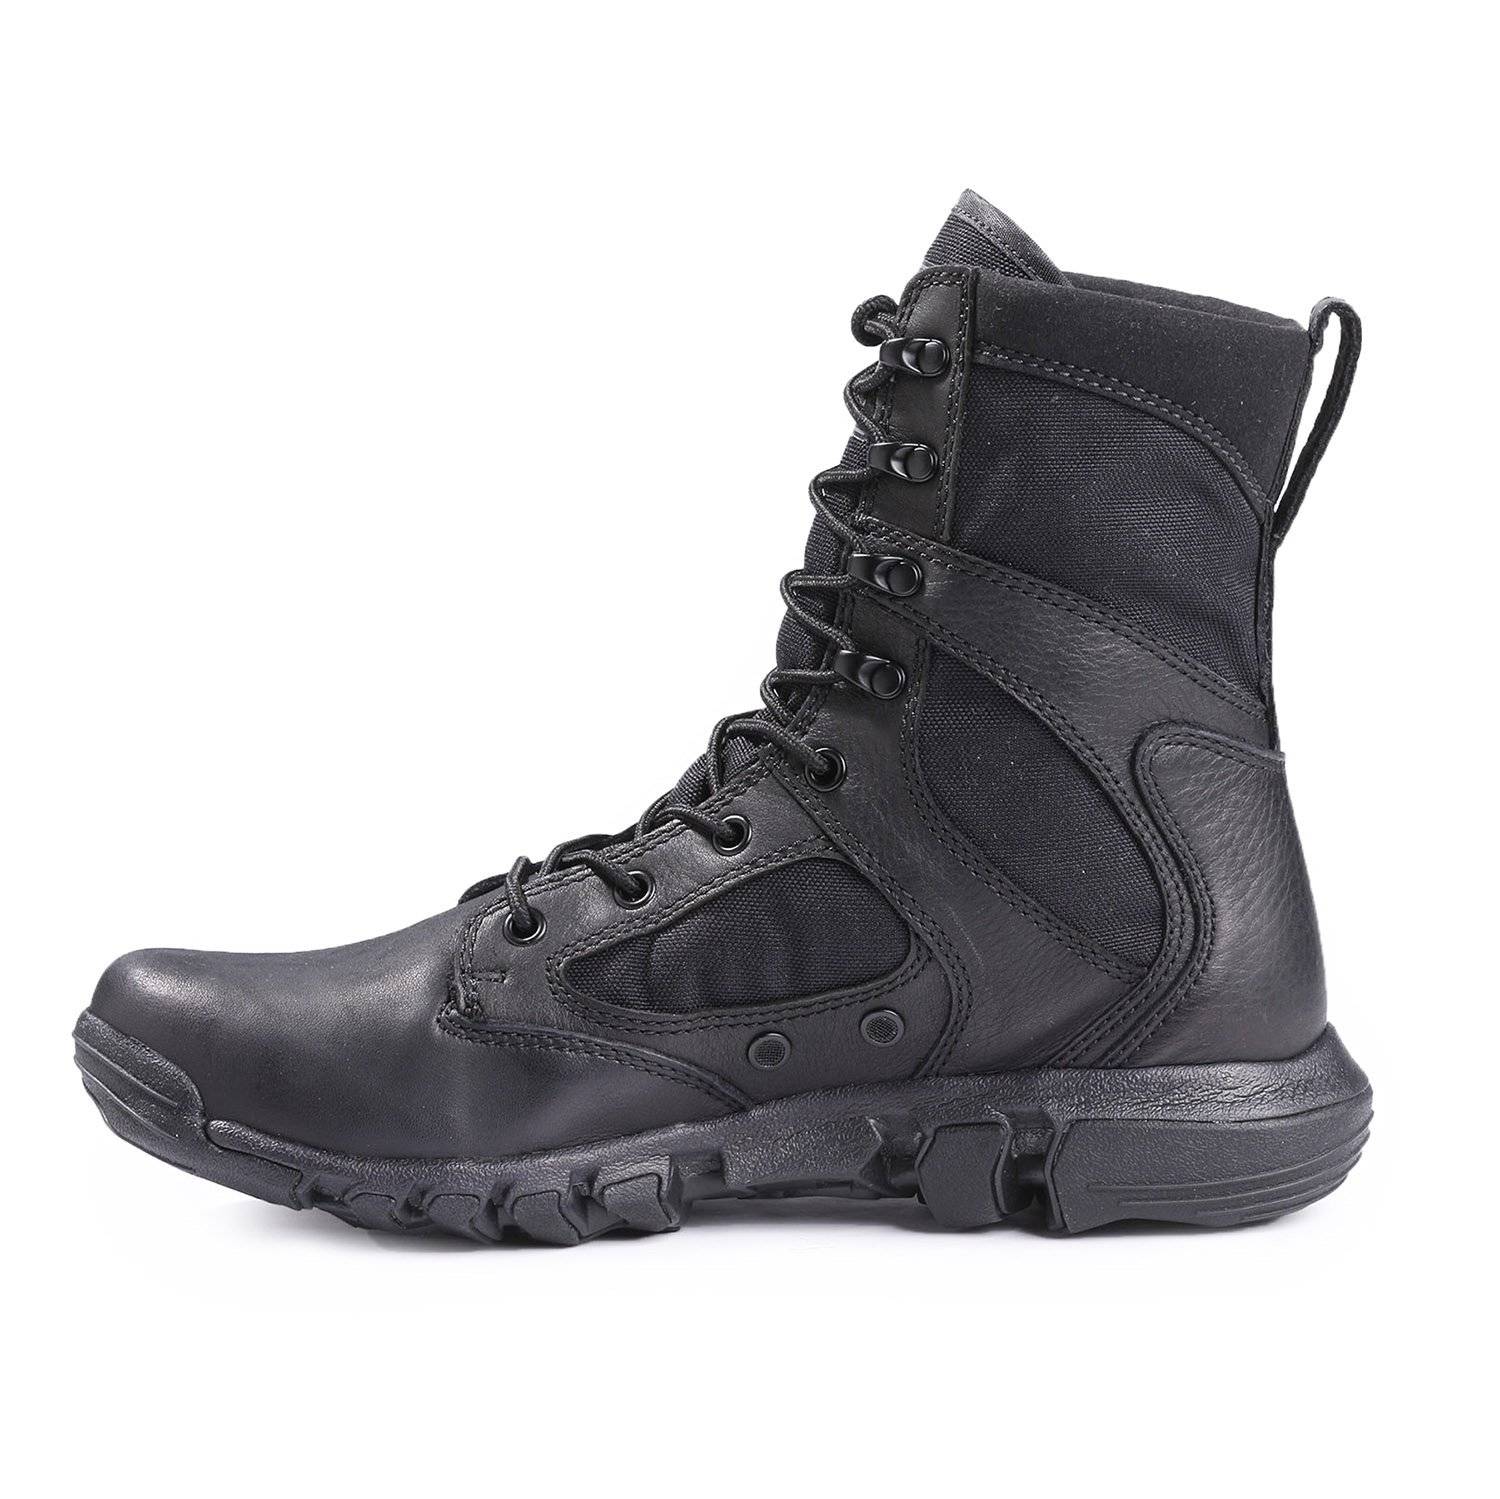 Under Armour Alegent Duty Boots at Galls